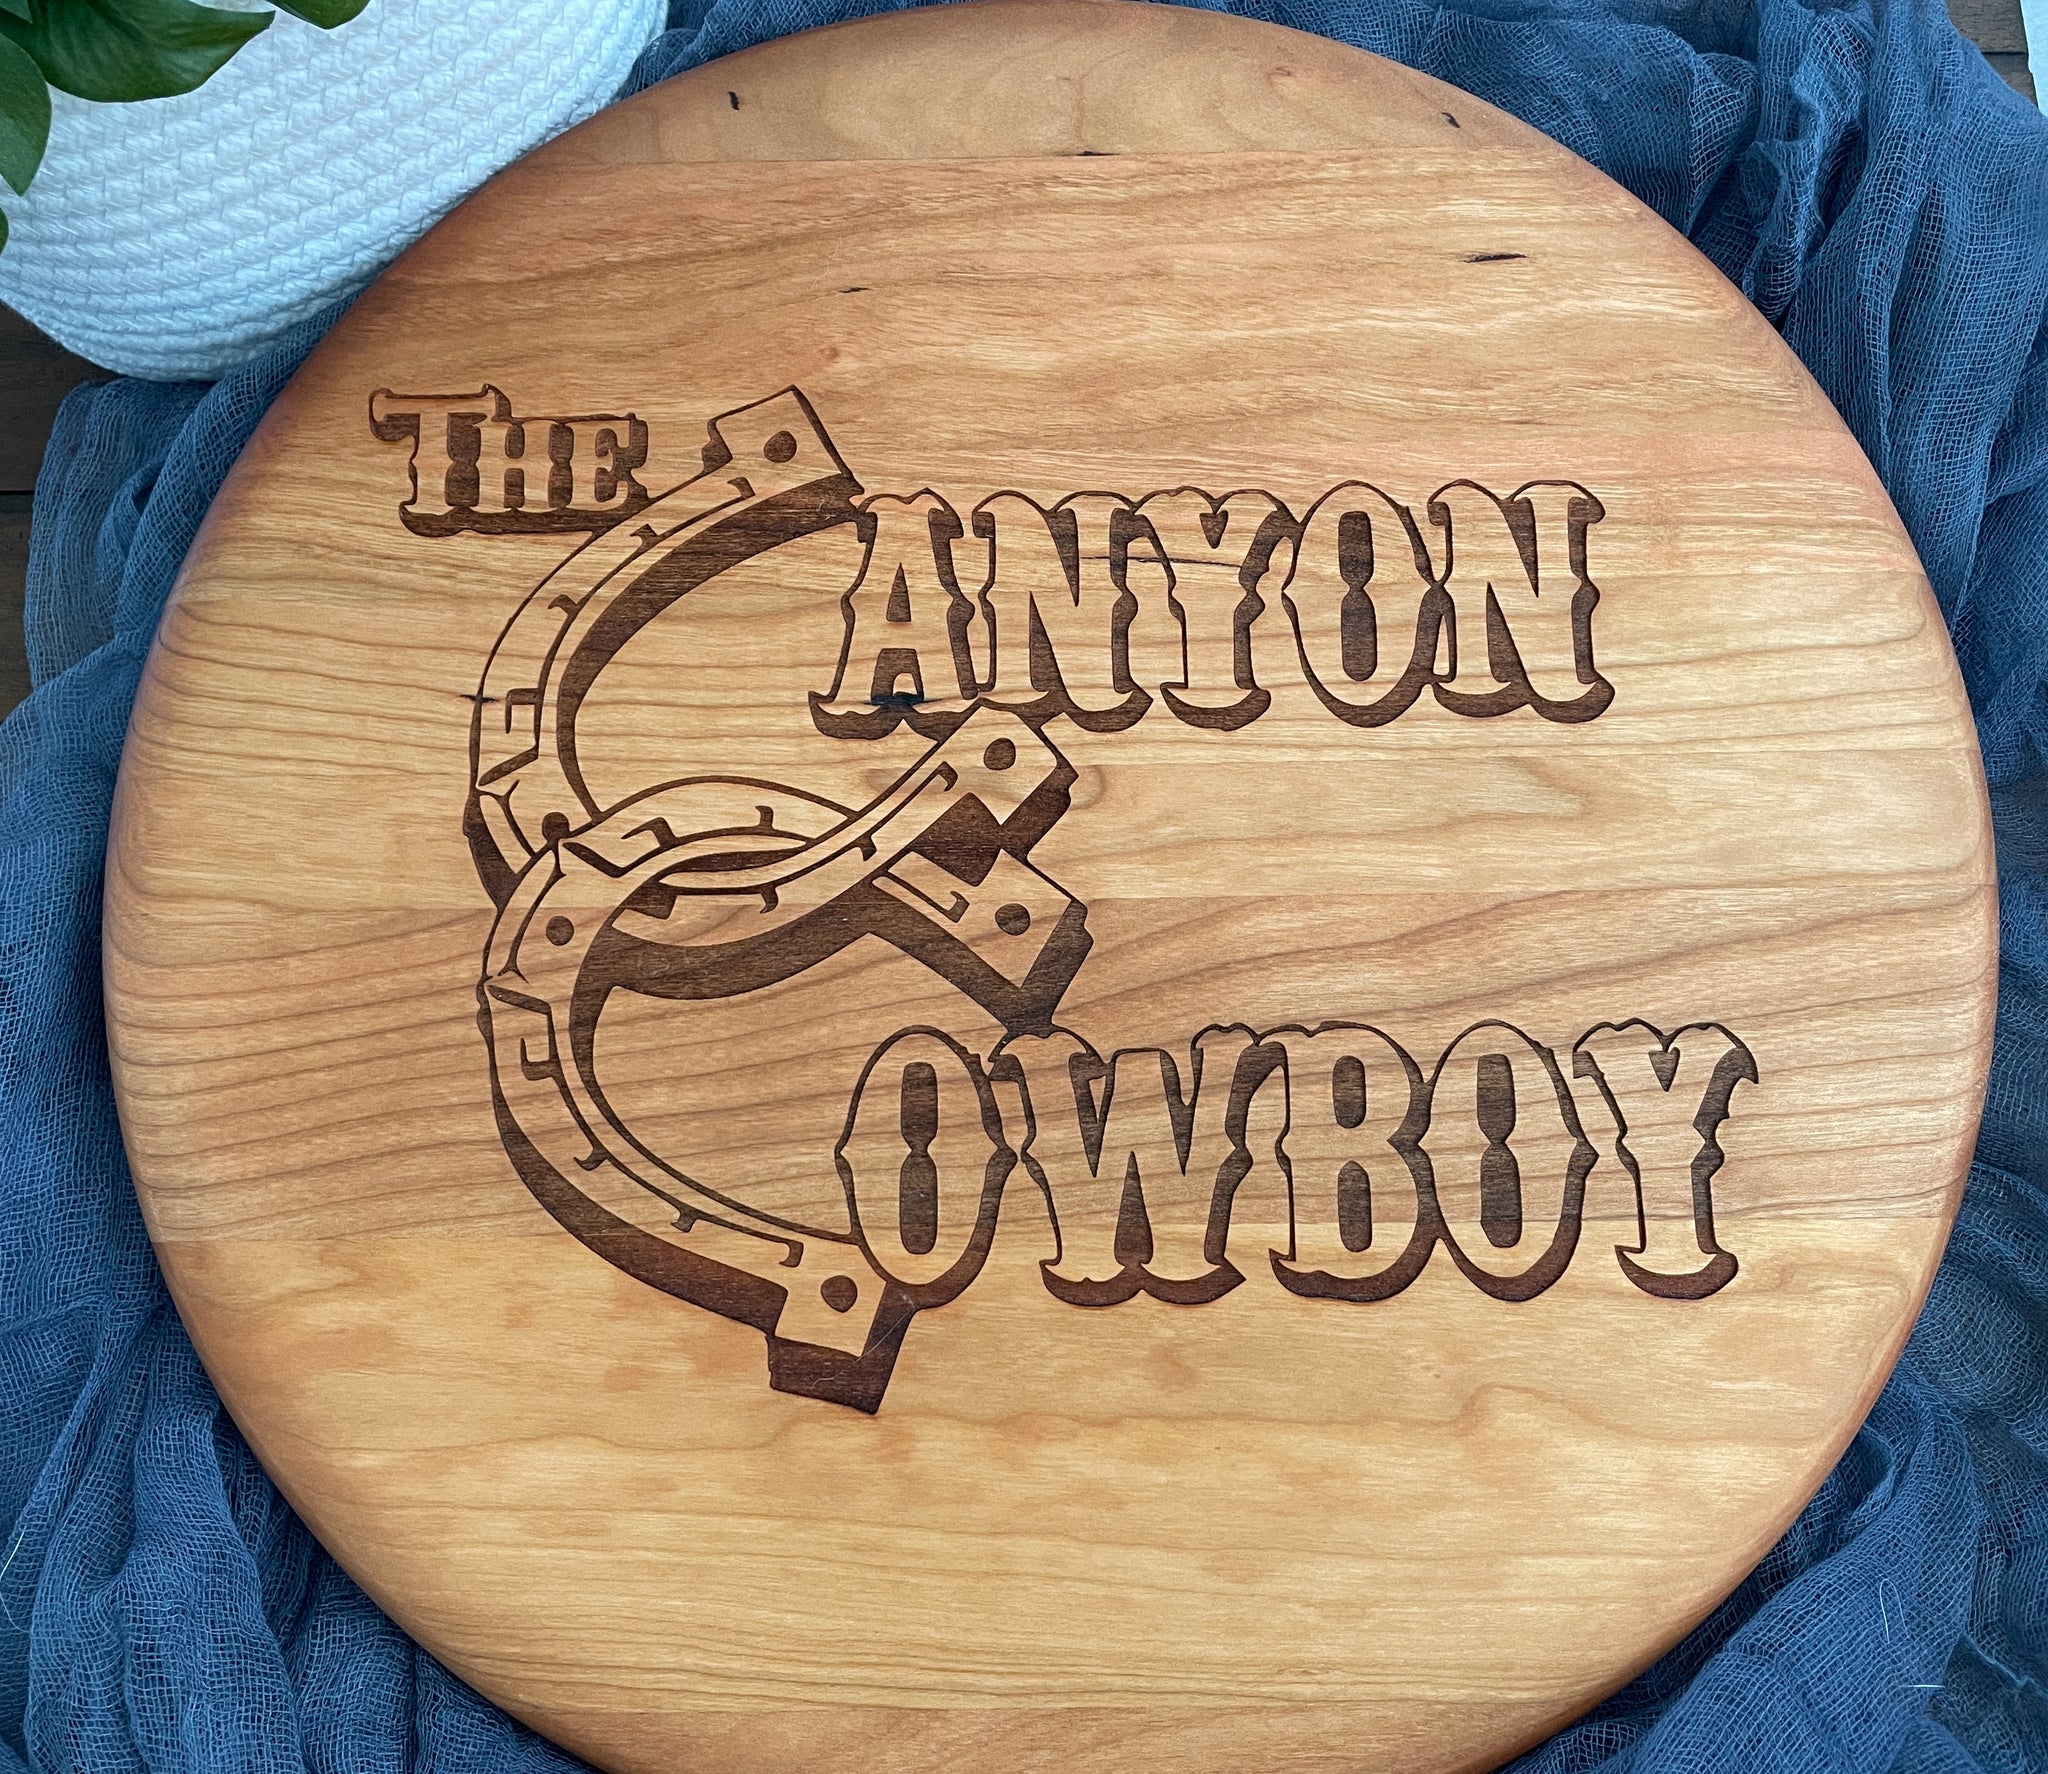 Personalized Wood Cutting Board - Customize Your Own Board